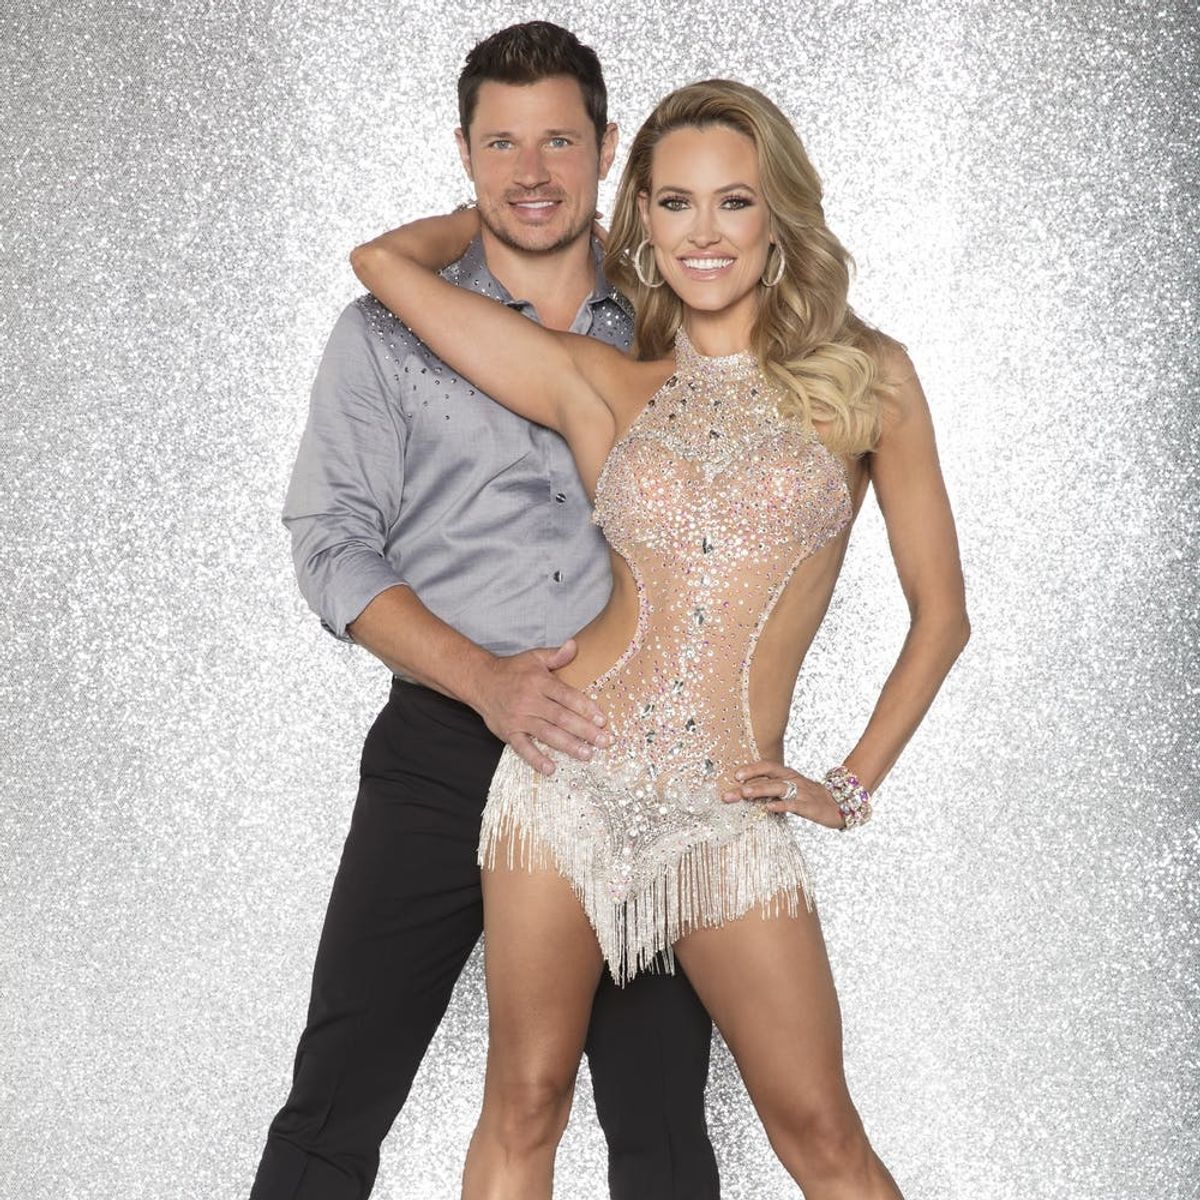 The “Dancing With the Stars” Season 25 Cast Has Been Revealed, and the Competition Is Fierce!